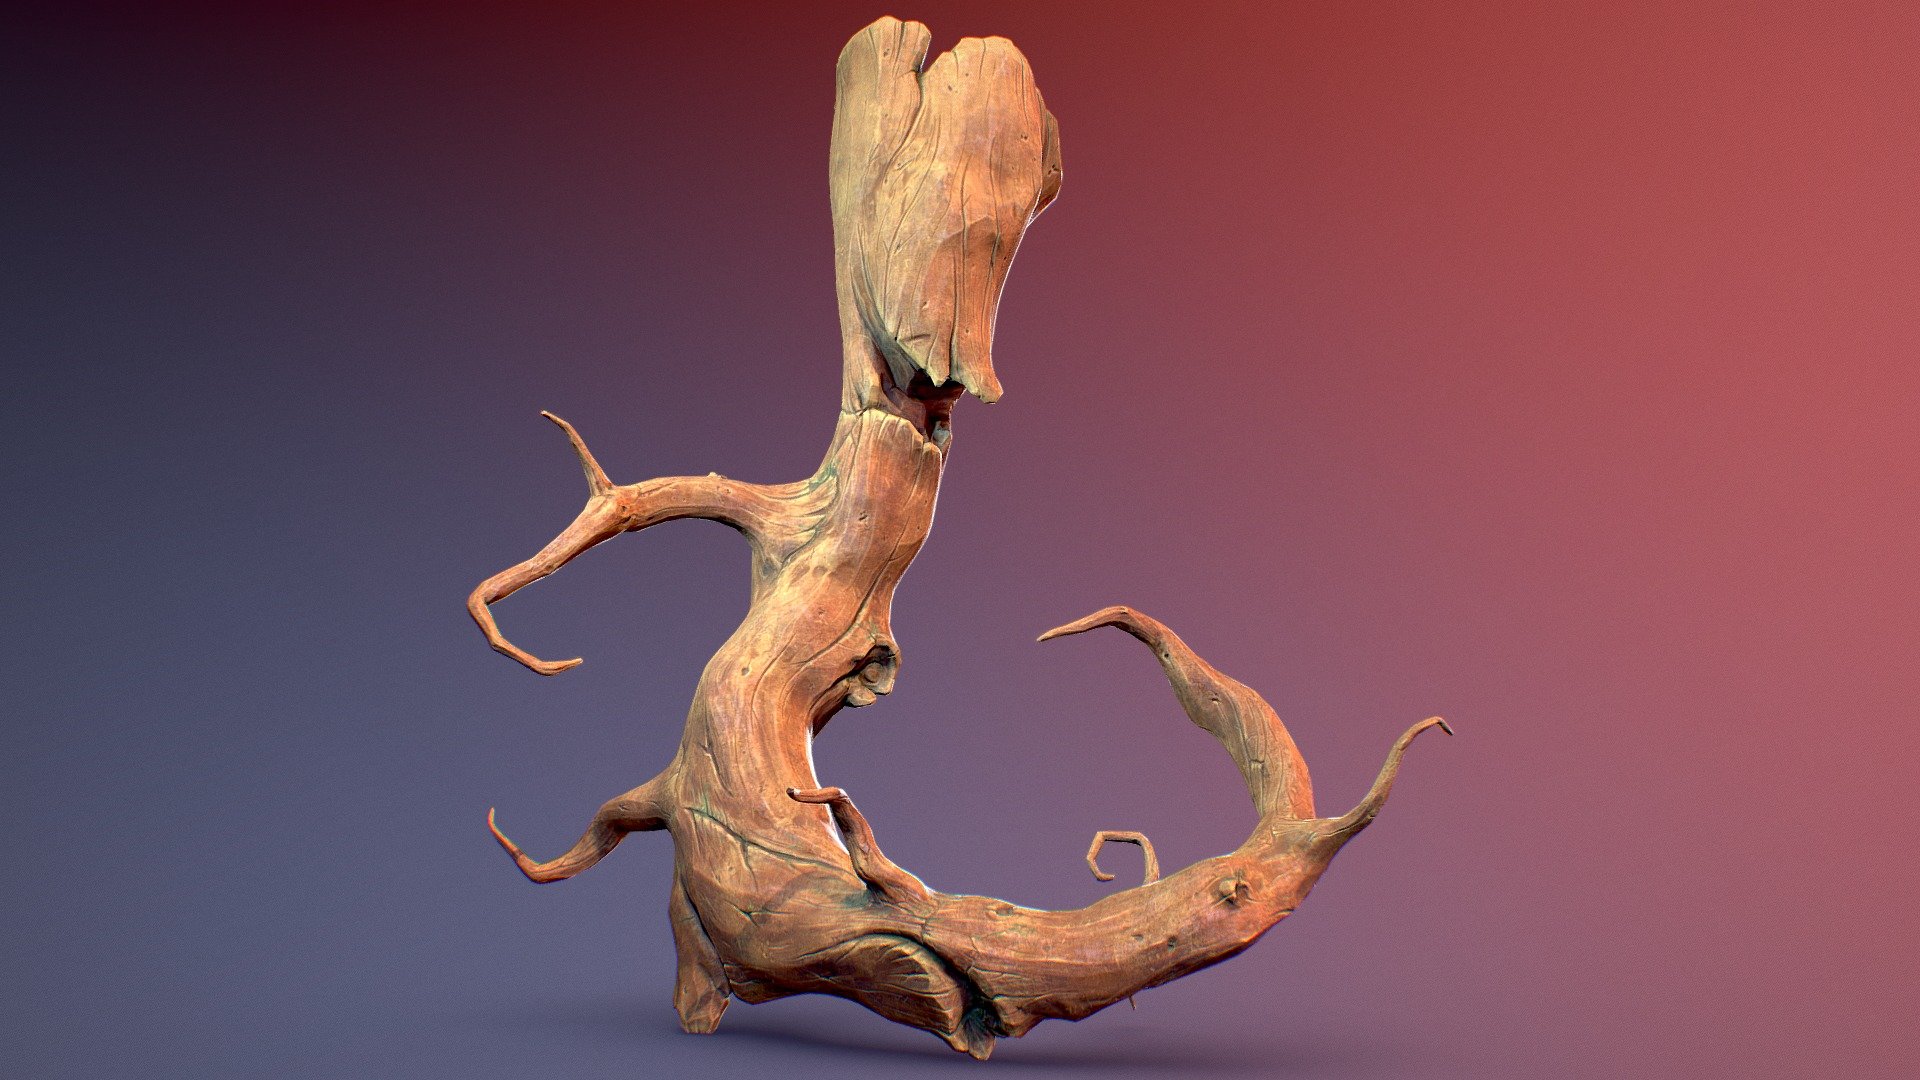 Low poly and textured version of my stylized tree monster sculpt (matcap version here: https://skfb.ly/6HE6W).
Sculpt: Zbrush. Retopo/UVs: 3DCoat. Texturing: Substance Painter (Mix of handpainting +  generators)

Artstation project page: https://www.artstation.com/artwork/mq65Rv

 - Stylized Tree Monster - LowPoly textured version - 3D model by Nicolas Cayré (@nicolas.cayre) 3d model